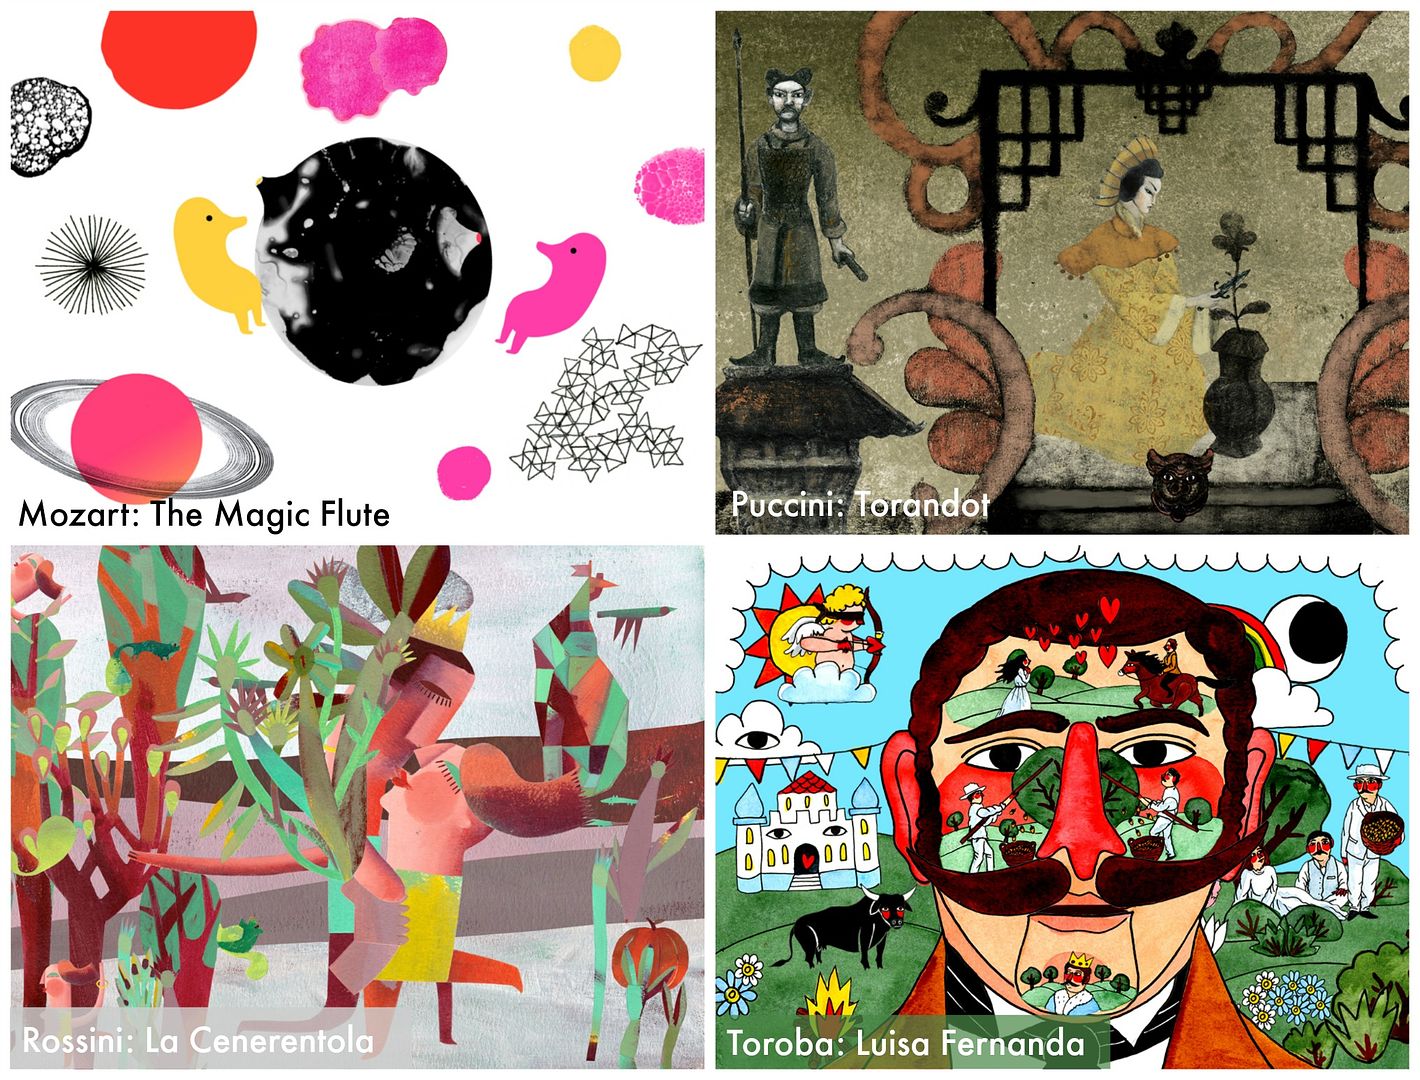 Play Opera app for kids: A fun combo of art, interactivity, and classic compositions